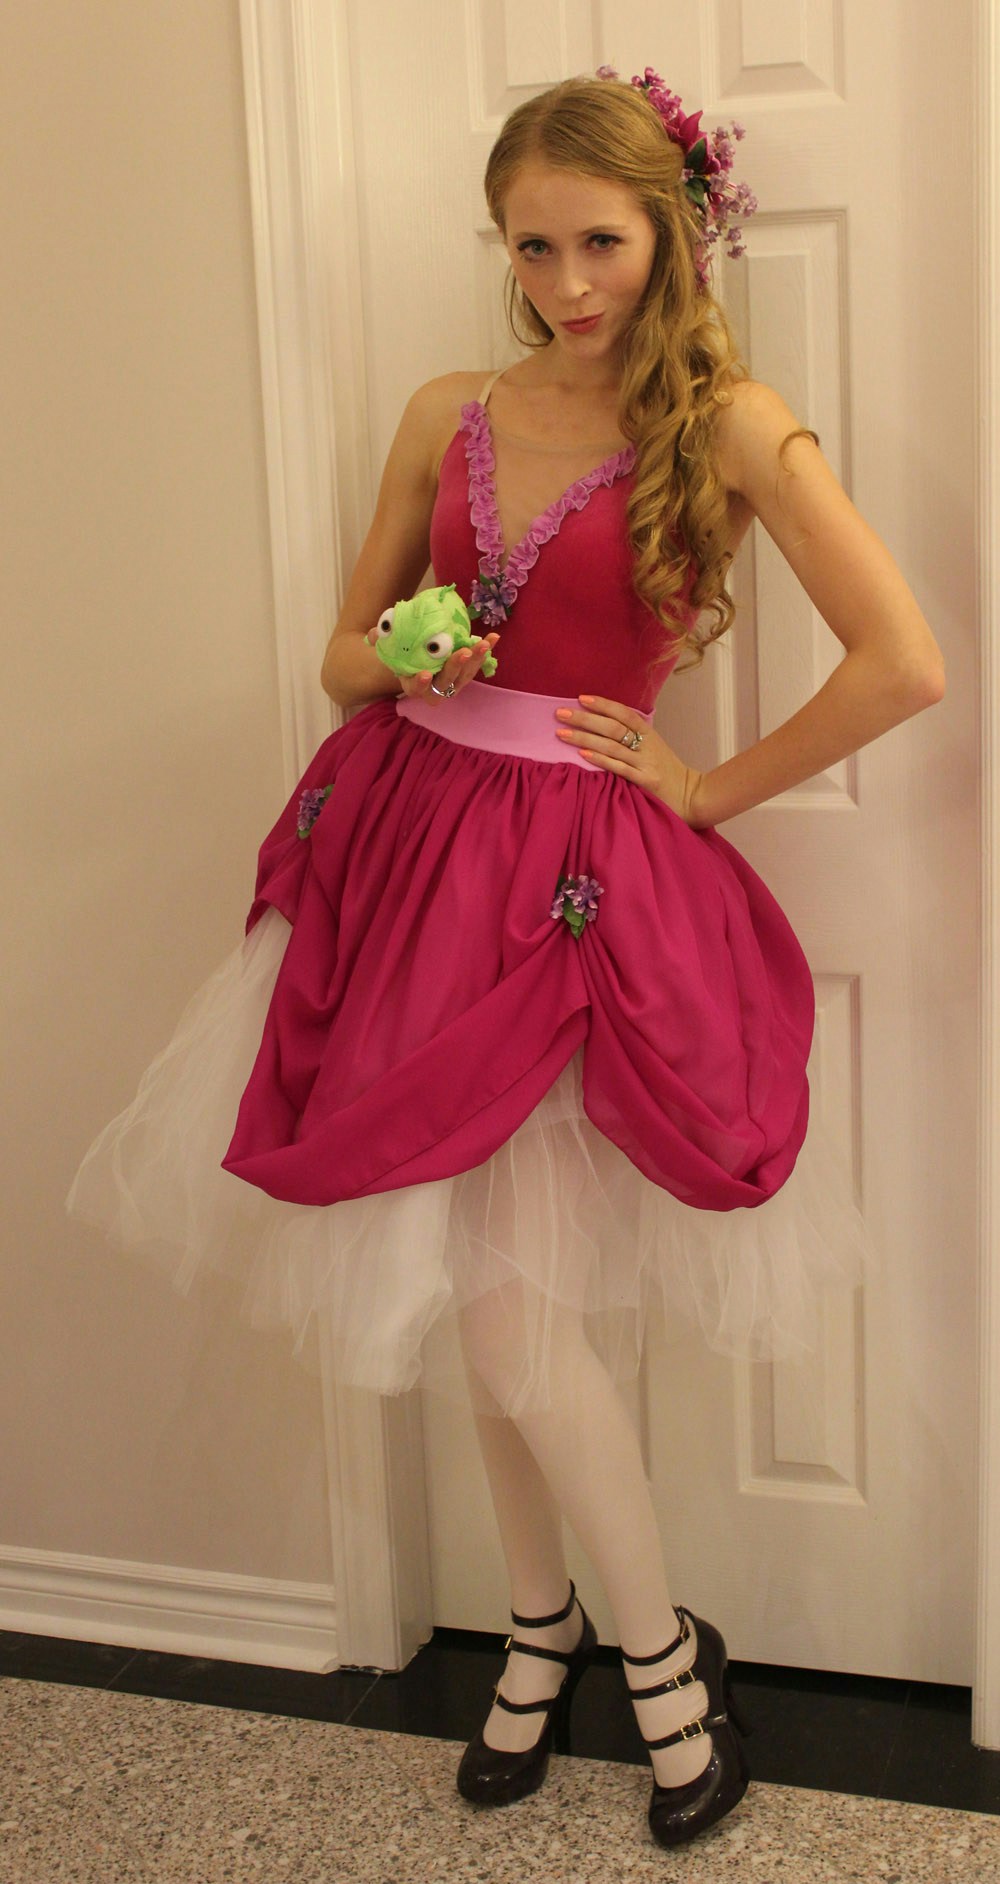 Rapunzel from Tangled Halloween Costume